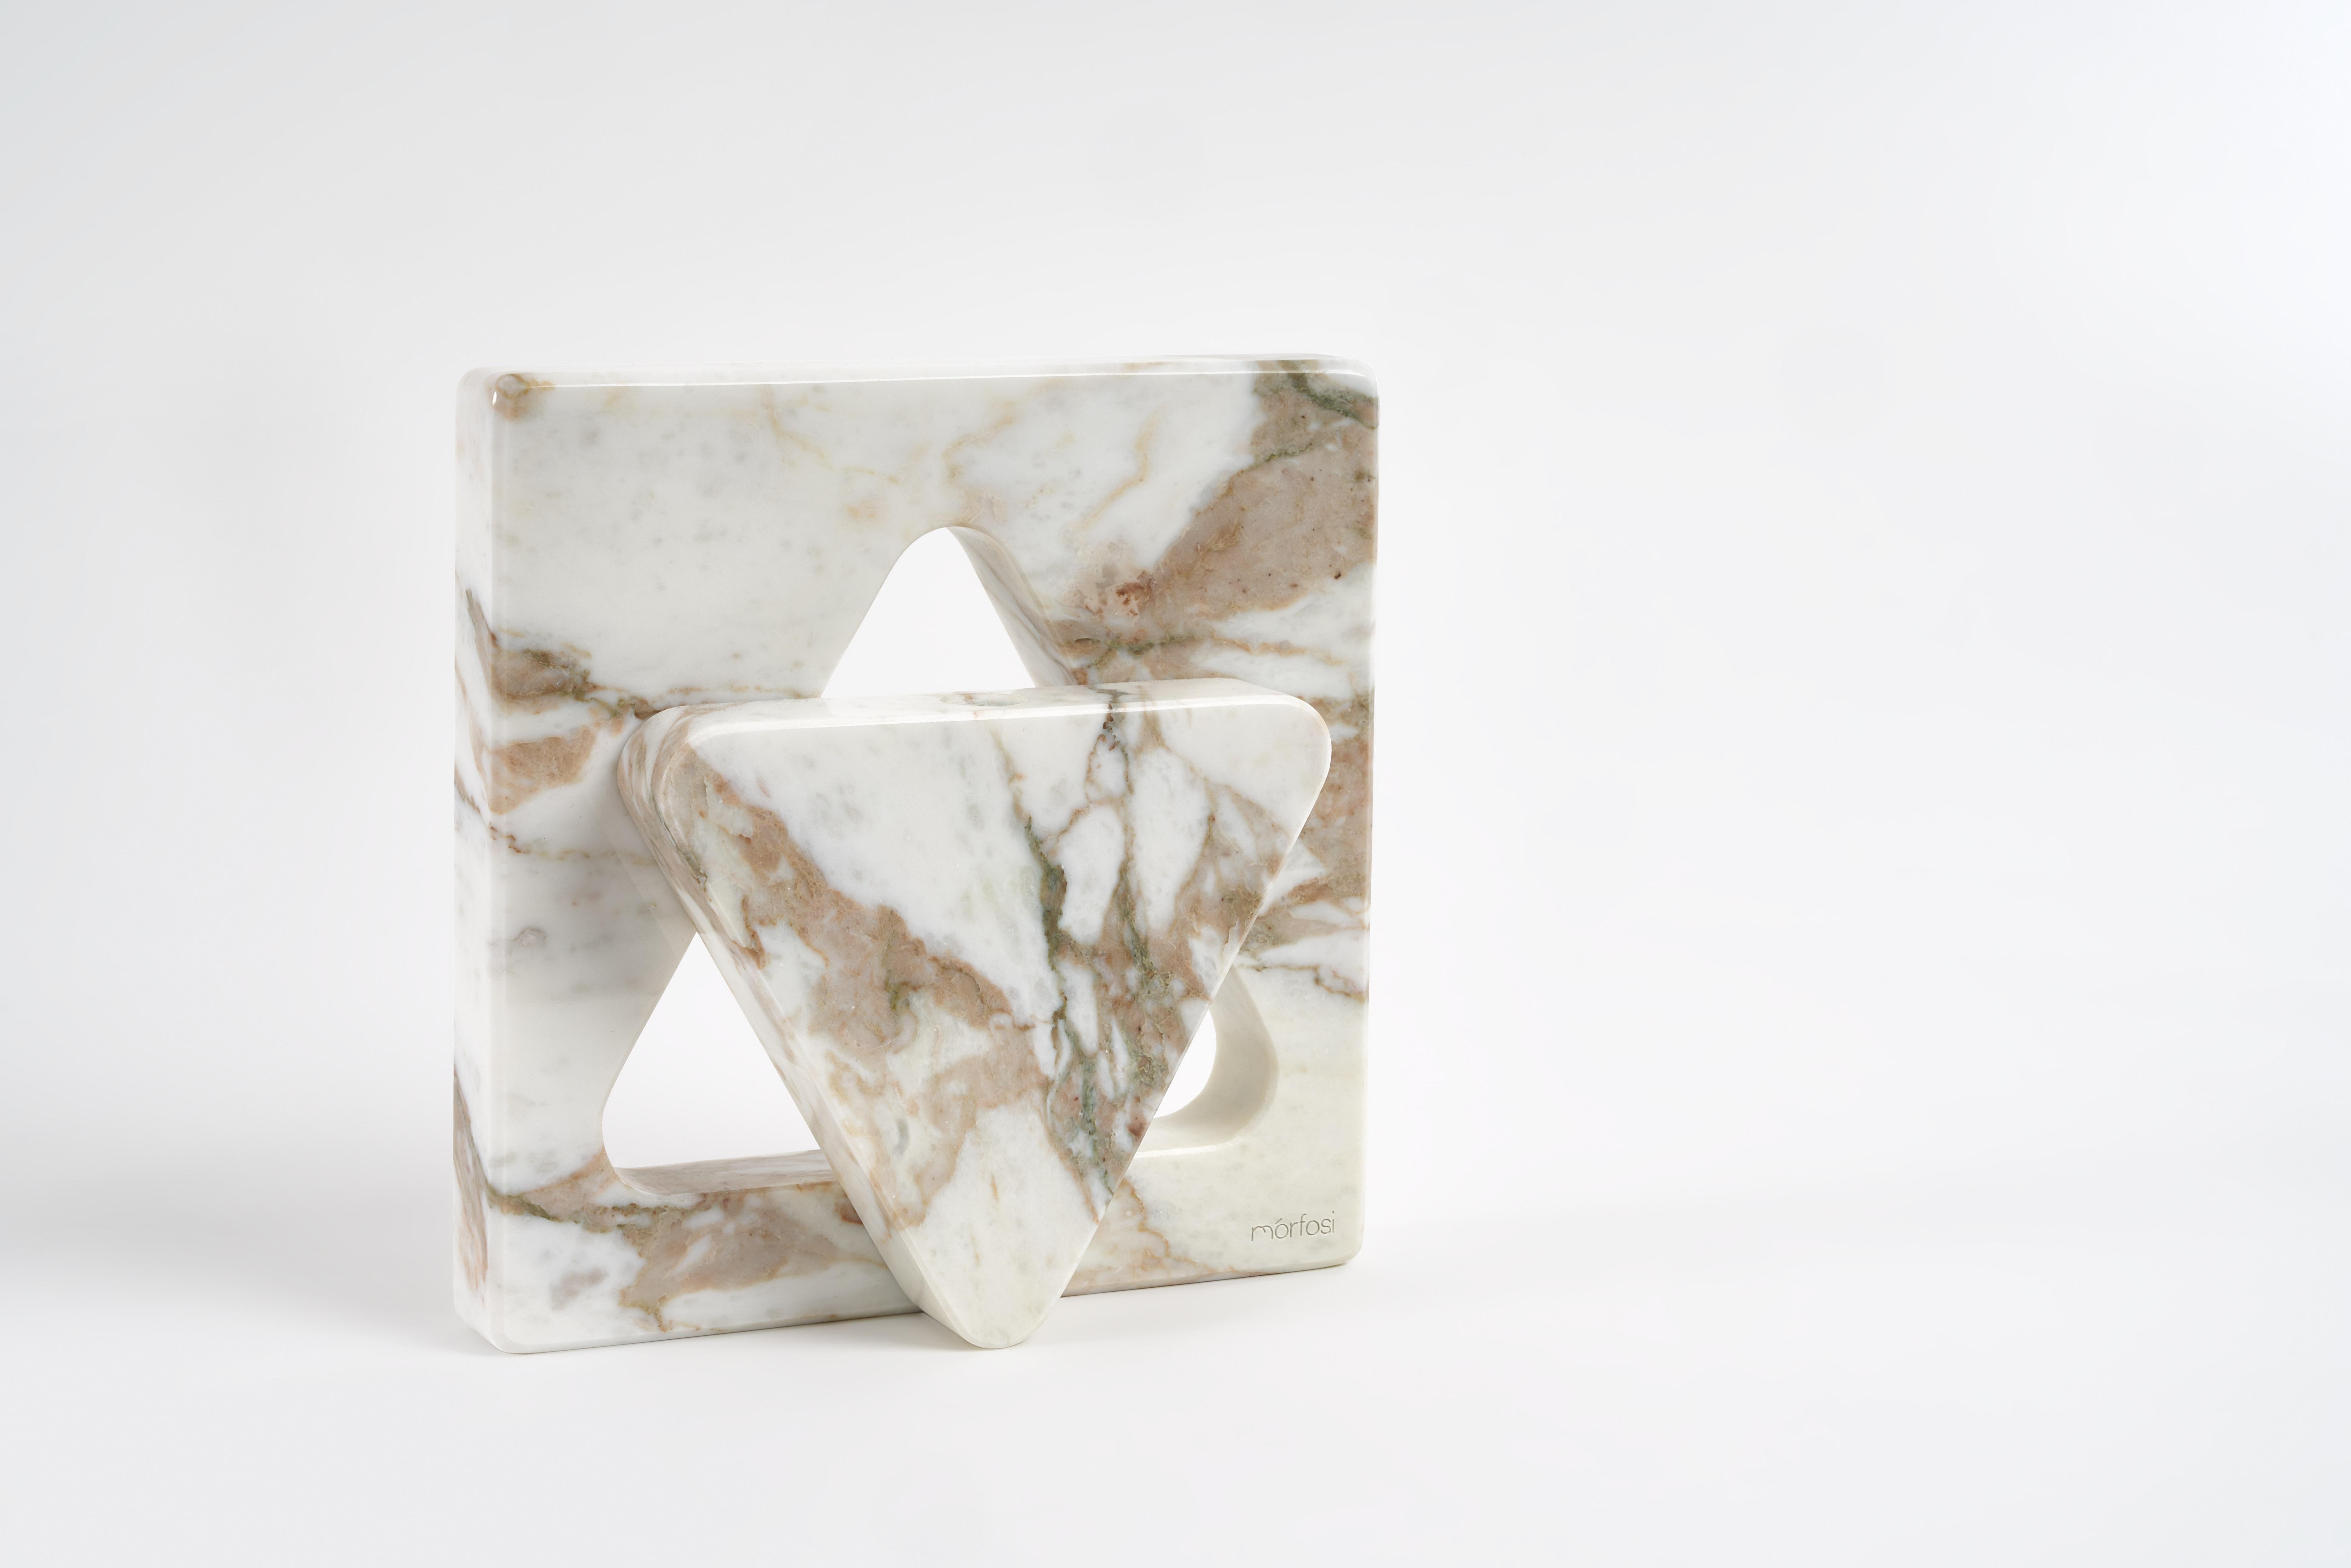 Marble one cut vase - Moreno Ratti
Dimensions: D 9 x W 20 x H 20 cm
Materials: Calcata Oro marble.

The idea of this collection comes from the desire to take the concept of minimalism to the extreme, as in the Recisi series: a single cut of a